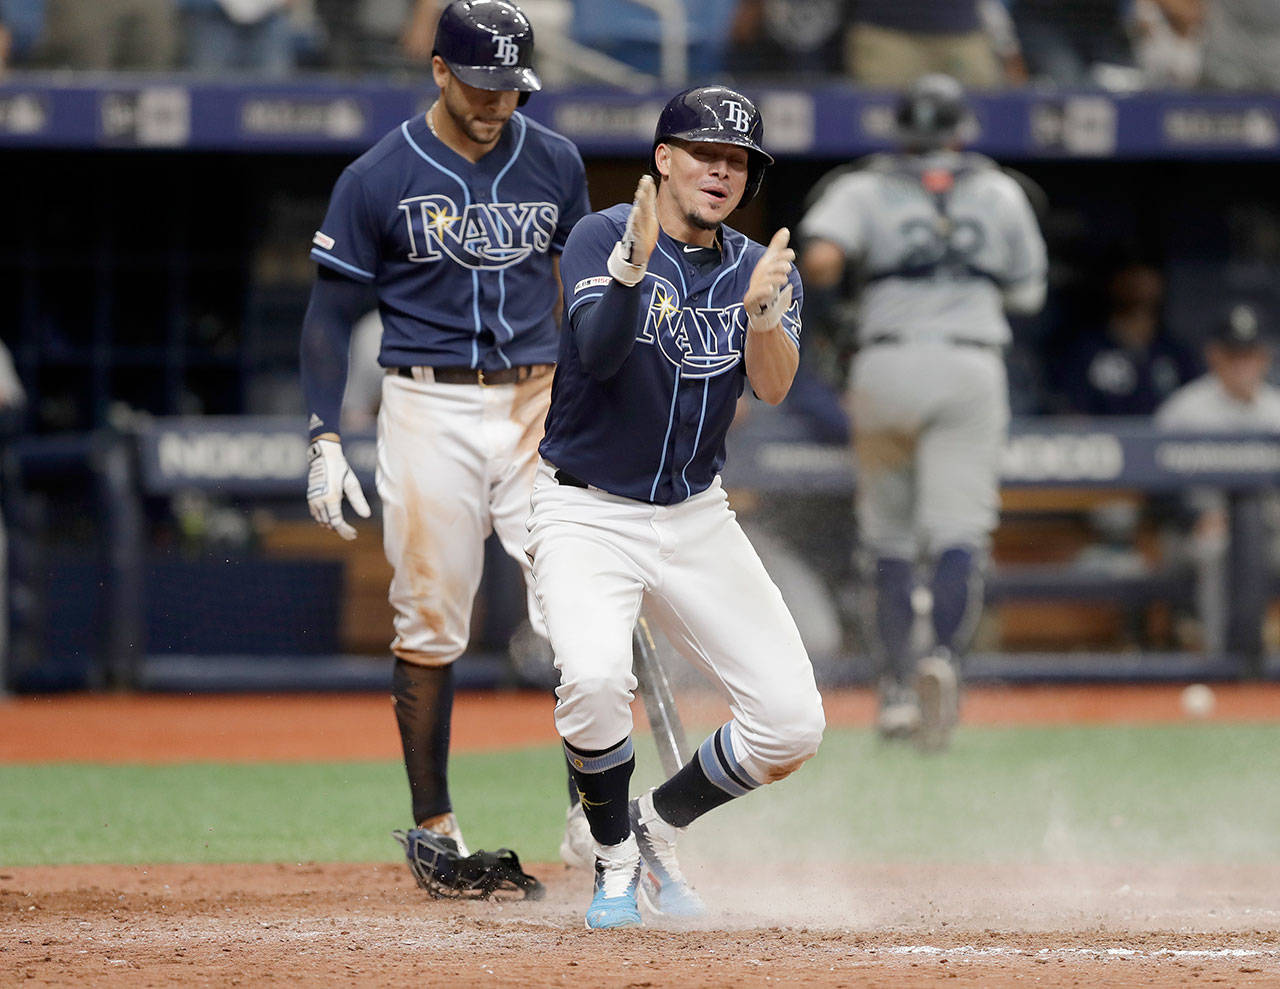 Tampa Bay’s Willy Adames (front) reacts to scoring the game-winning run on a wild pitch by Seattle’s Matt Magill during the ninth inning Wednesday in St. Petersburg, Florida, as Tommy Pham looks on. (AP Photo/Chris O’Meara)